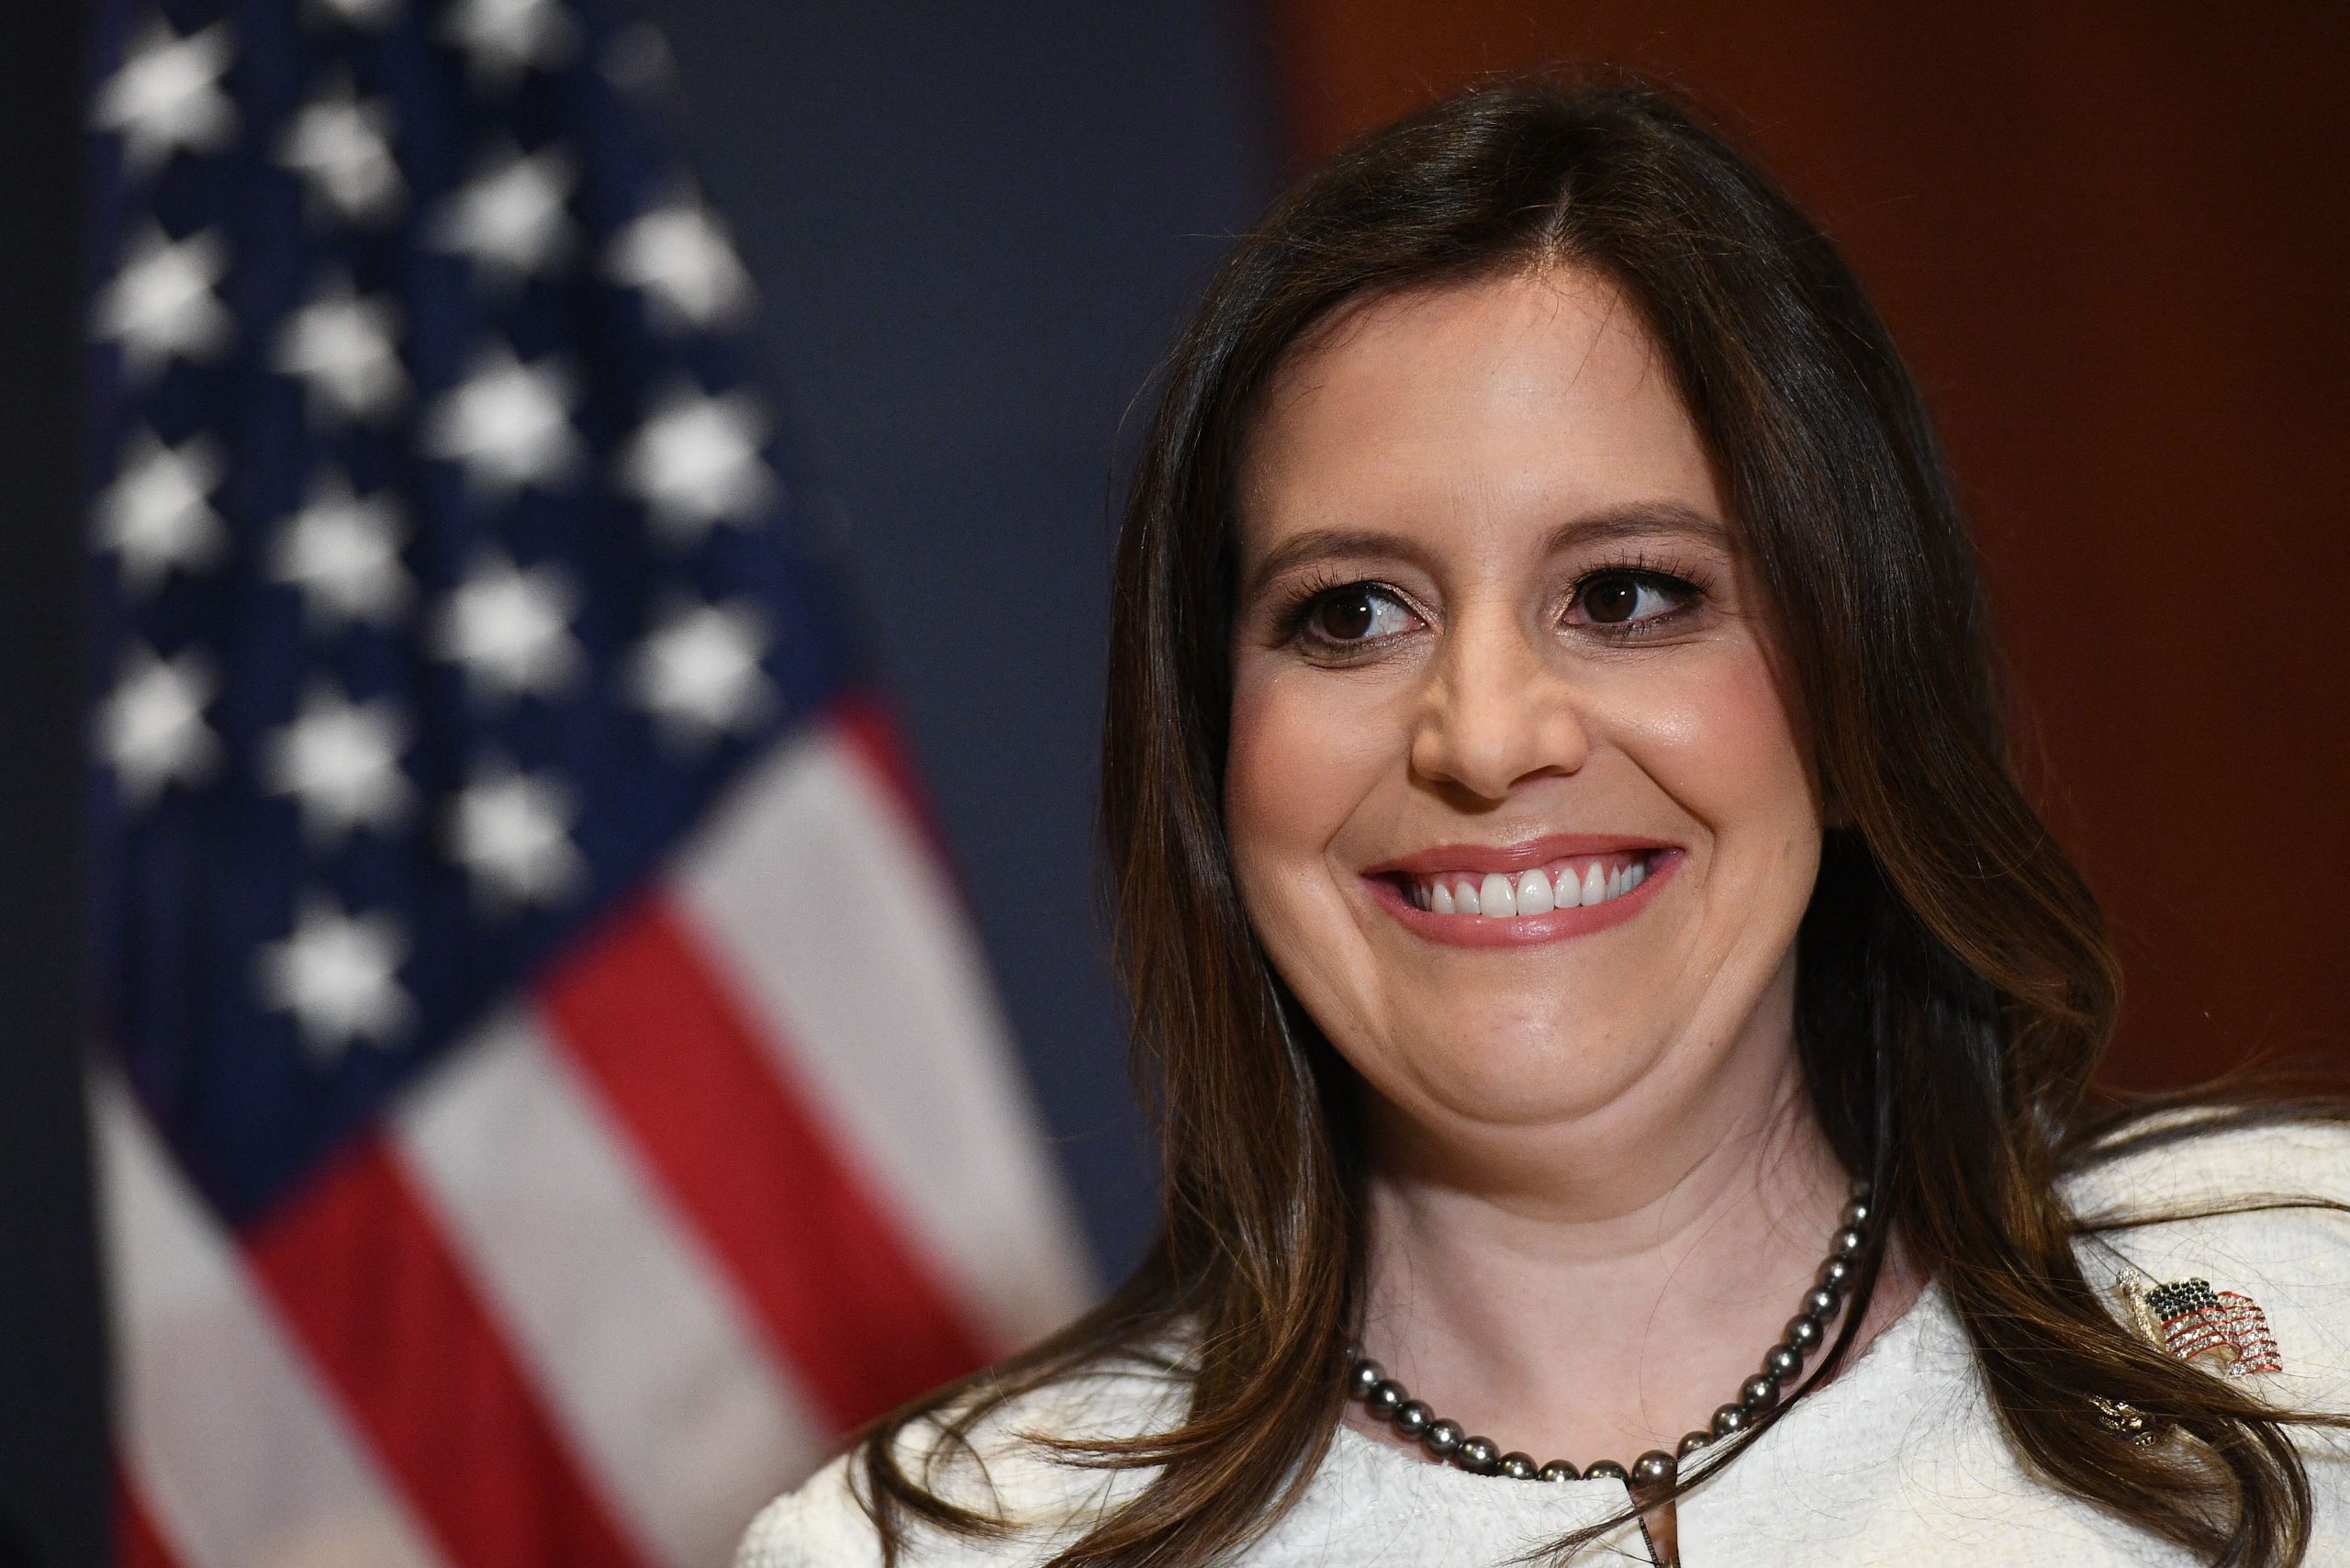 ‘Donald Trump is critical to the party,’ says rising Republican Elise Stefanik